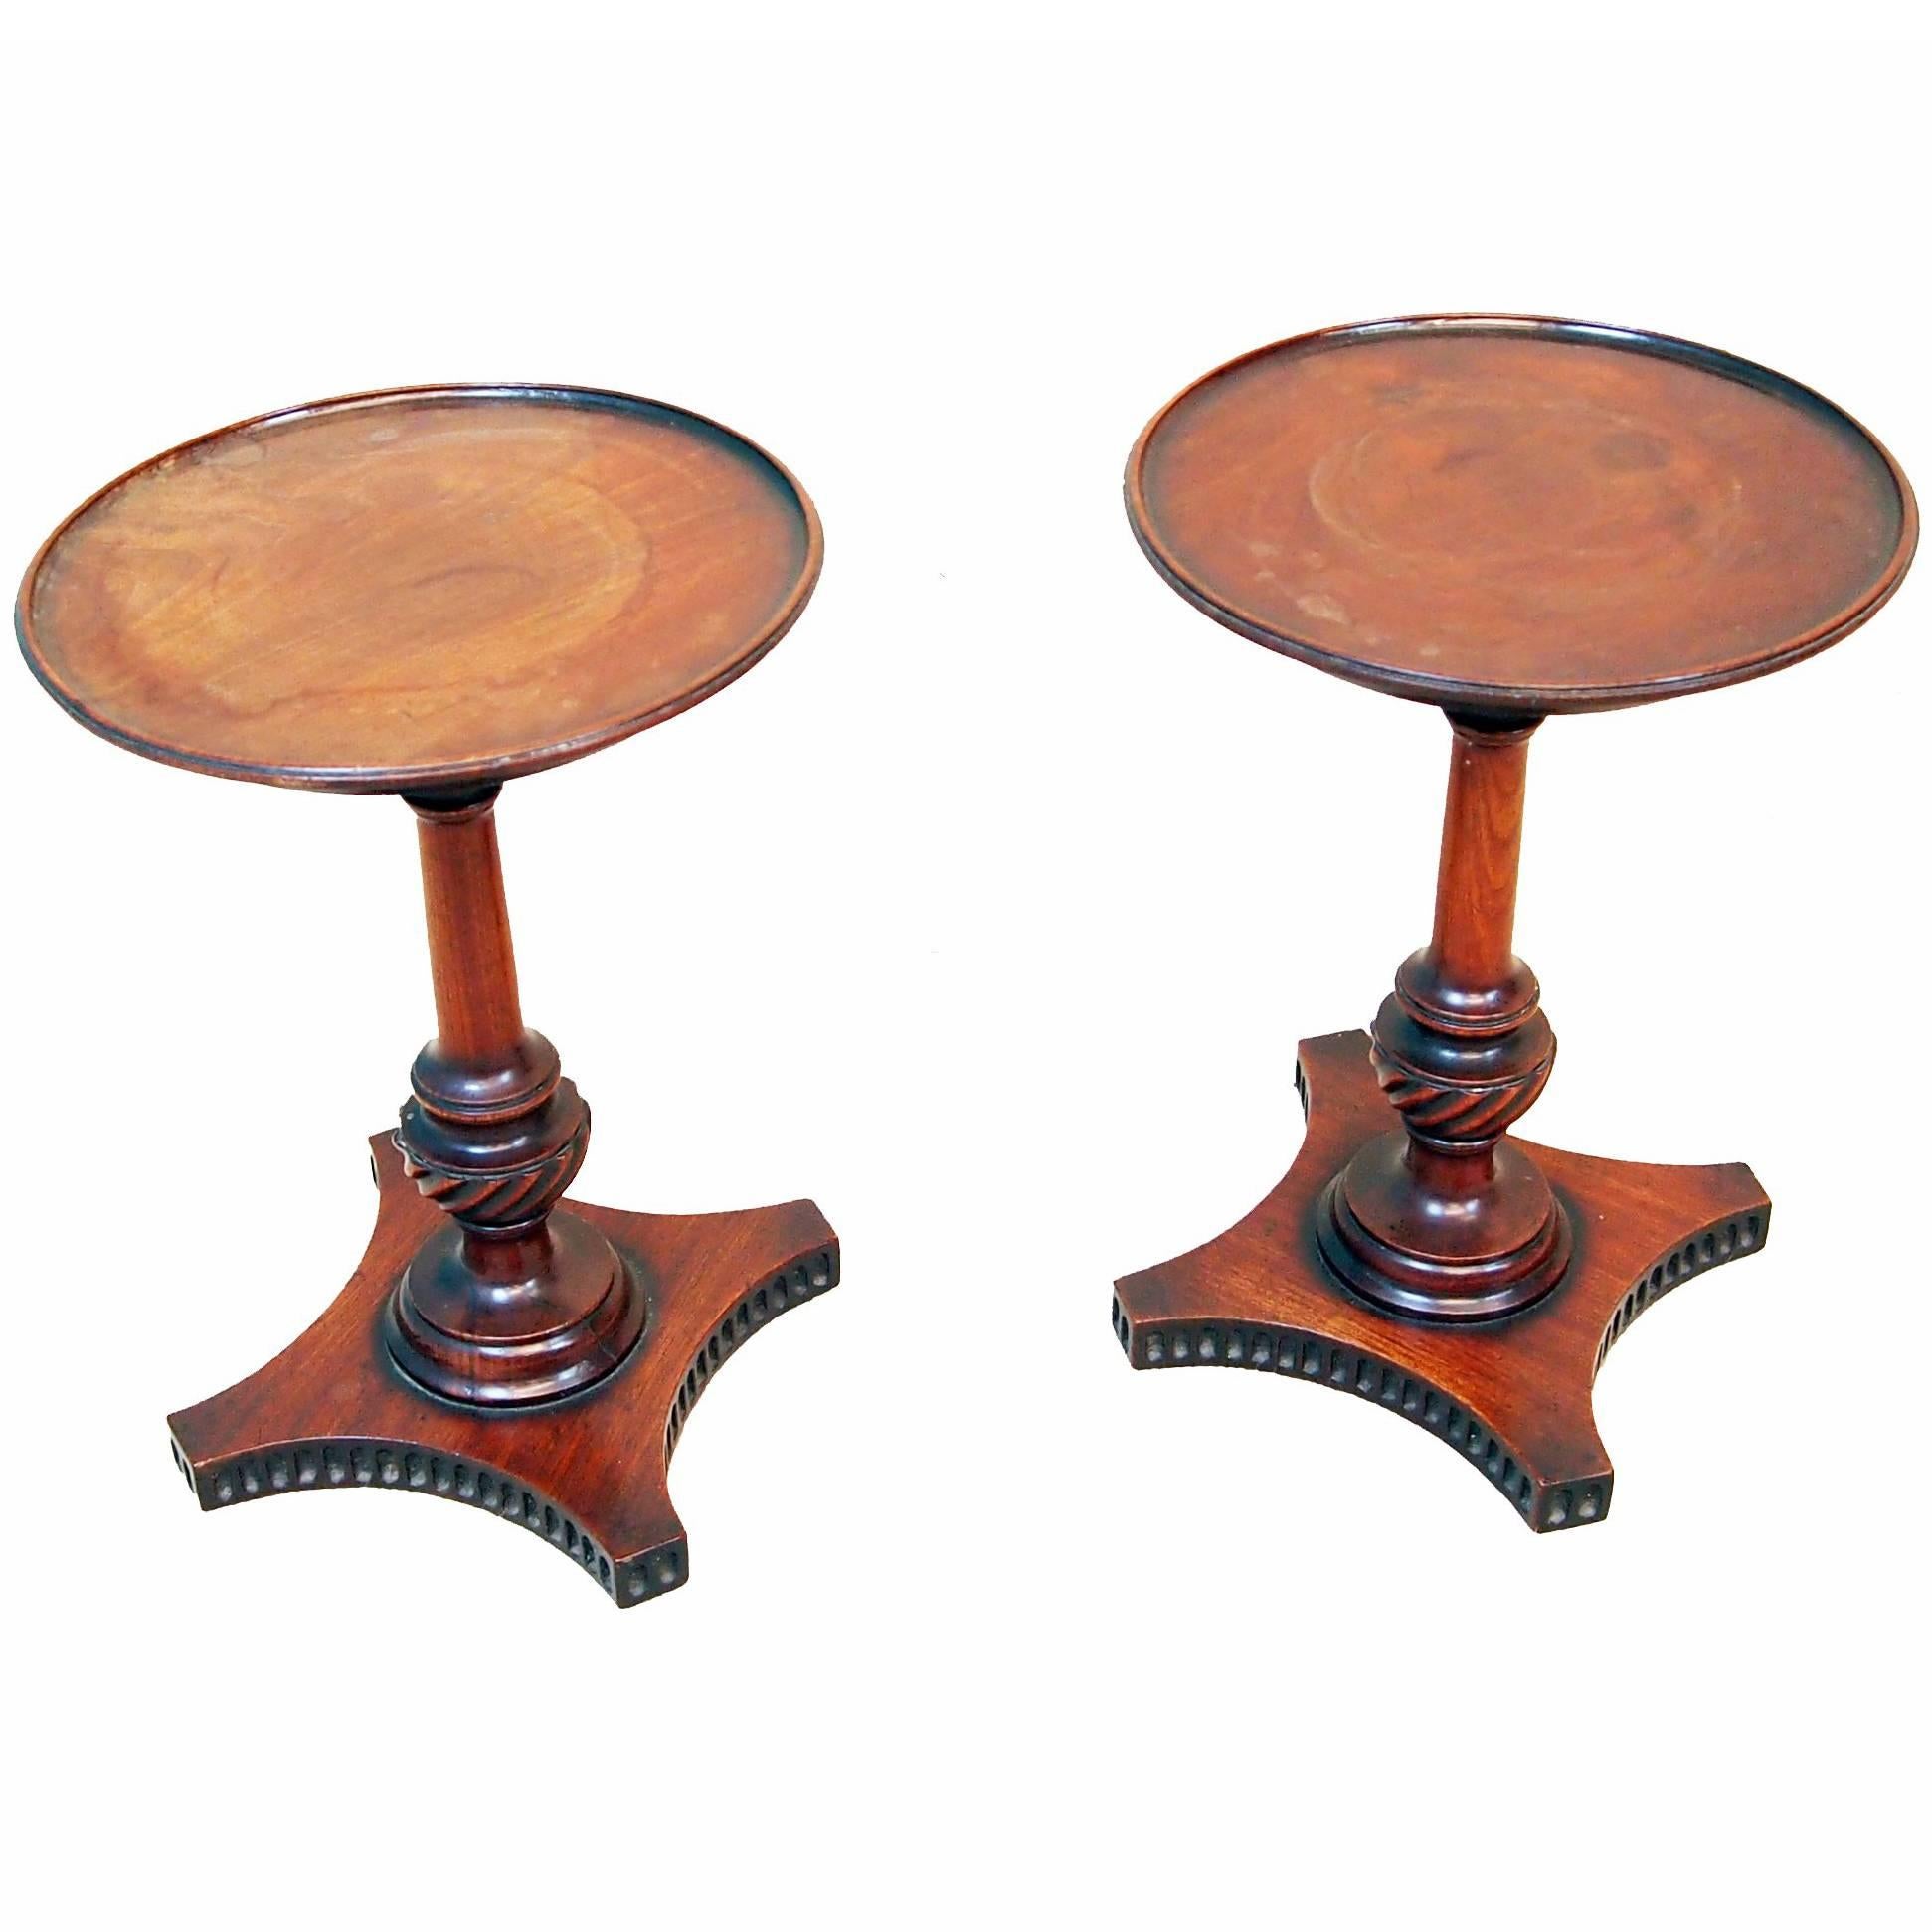 Antique 18th Century Mahogany Pair of Candlestands